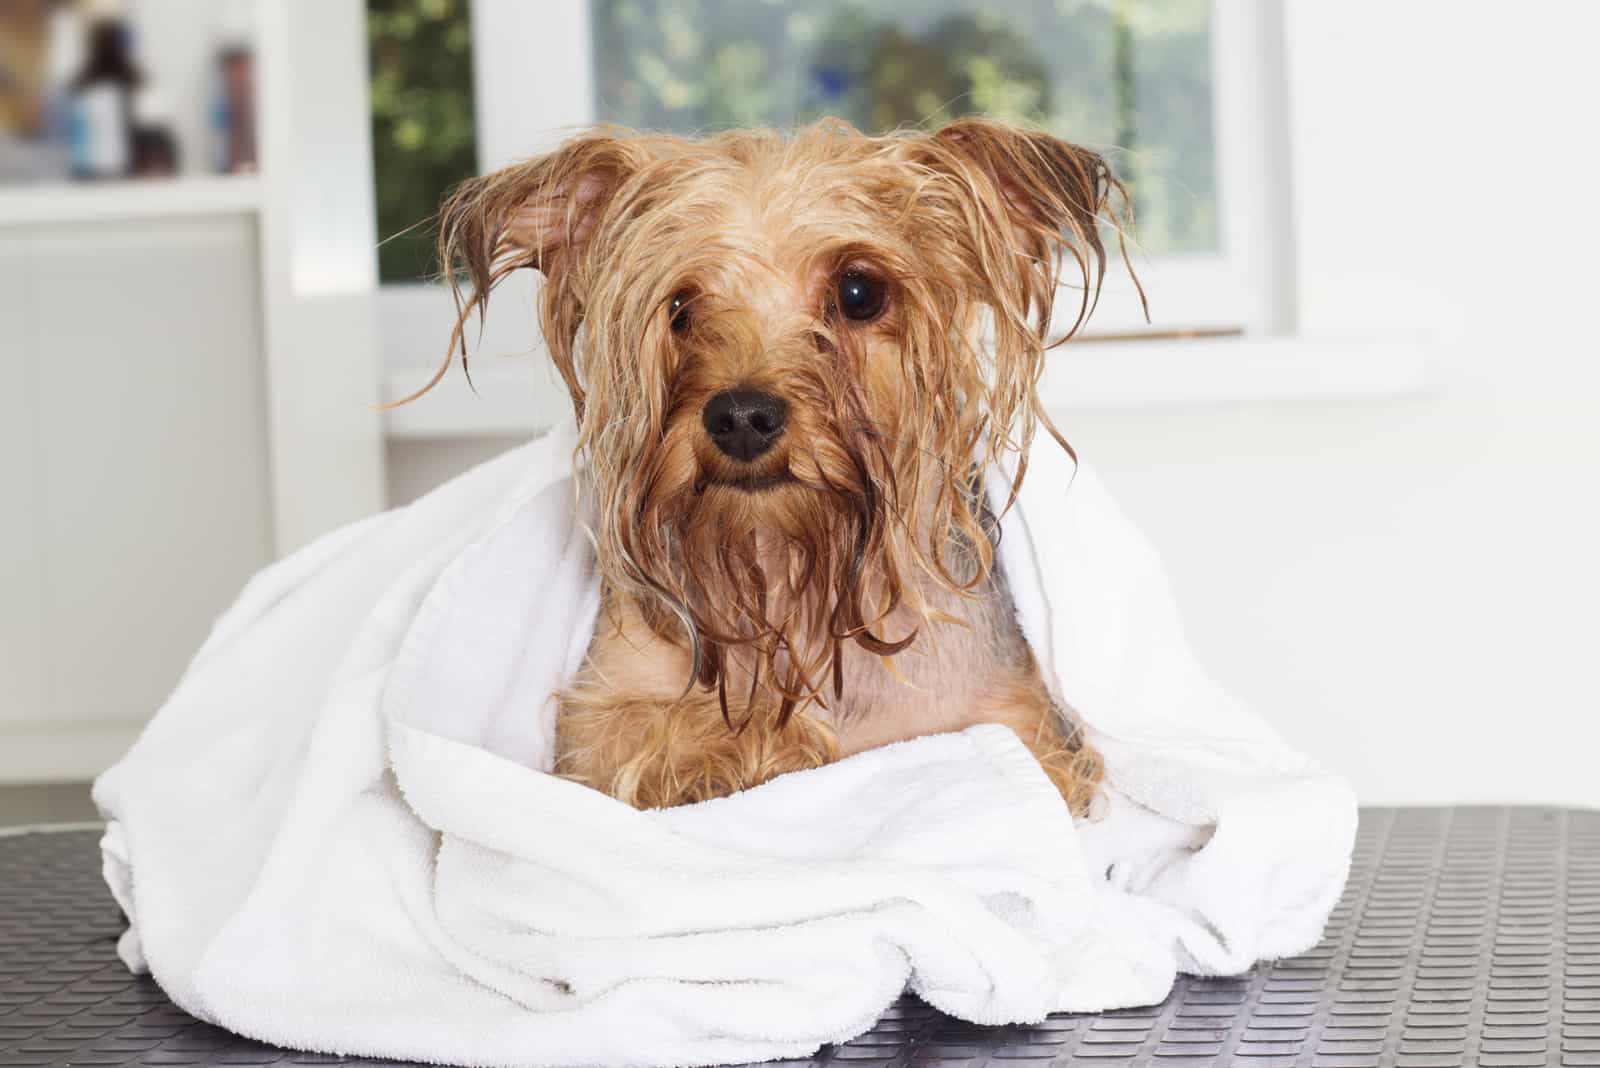 Wet yorkshire terrier dog in a towel